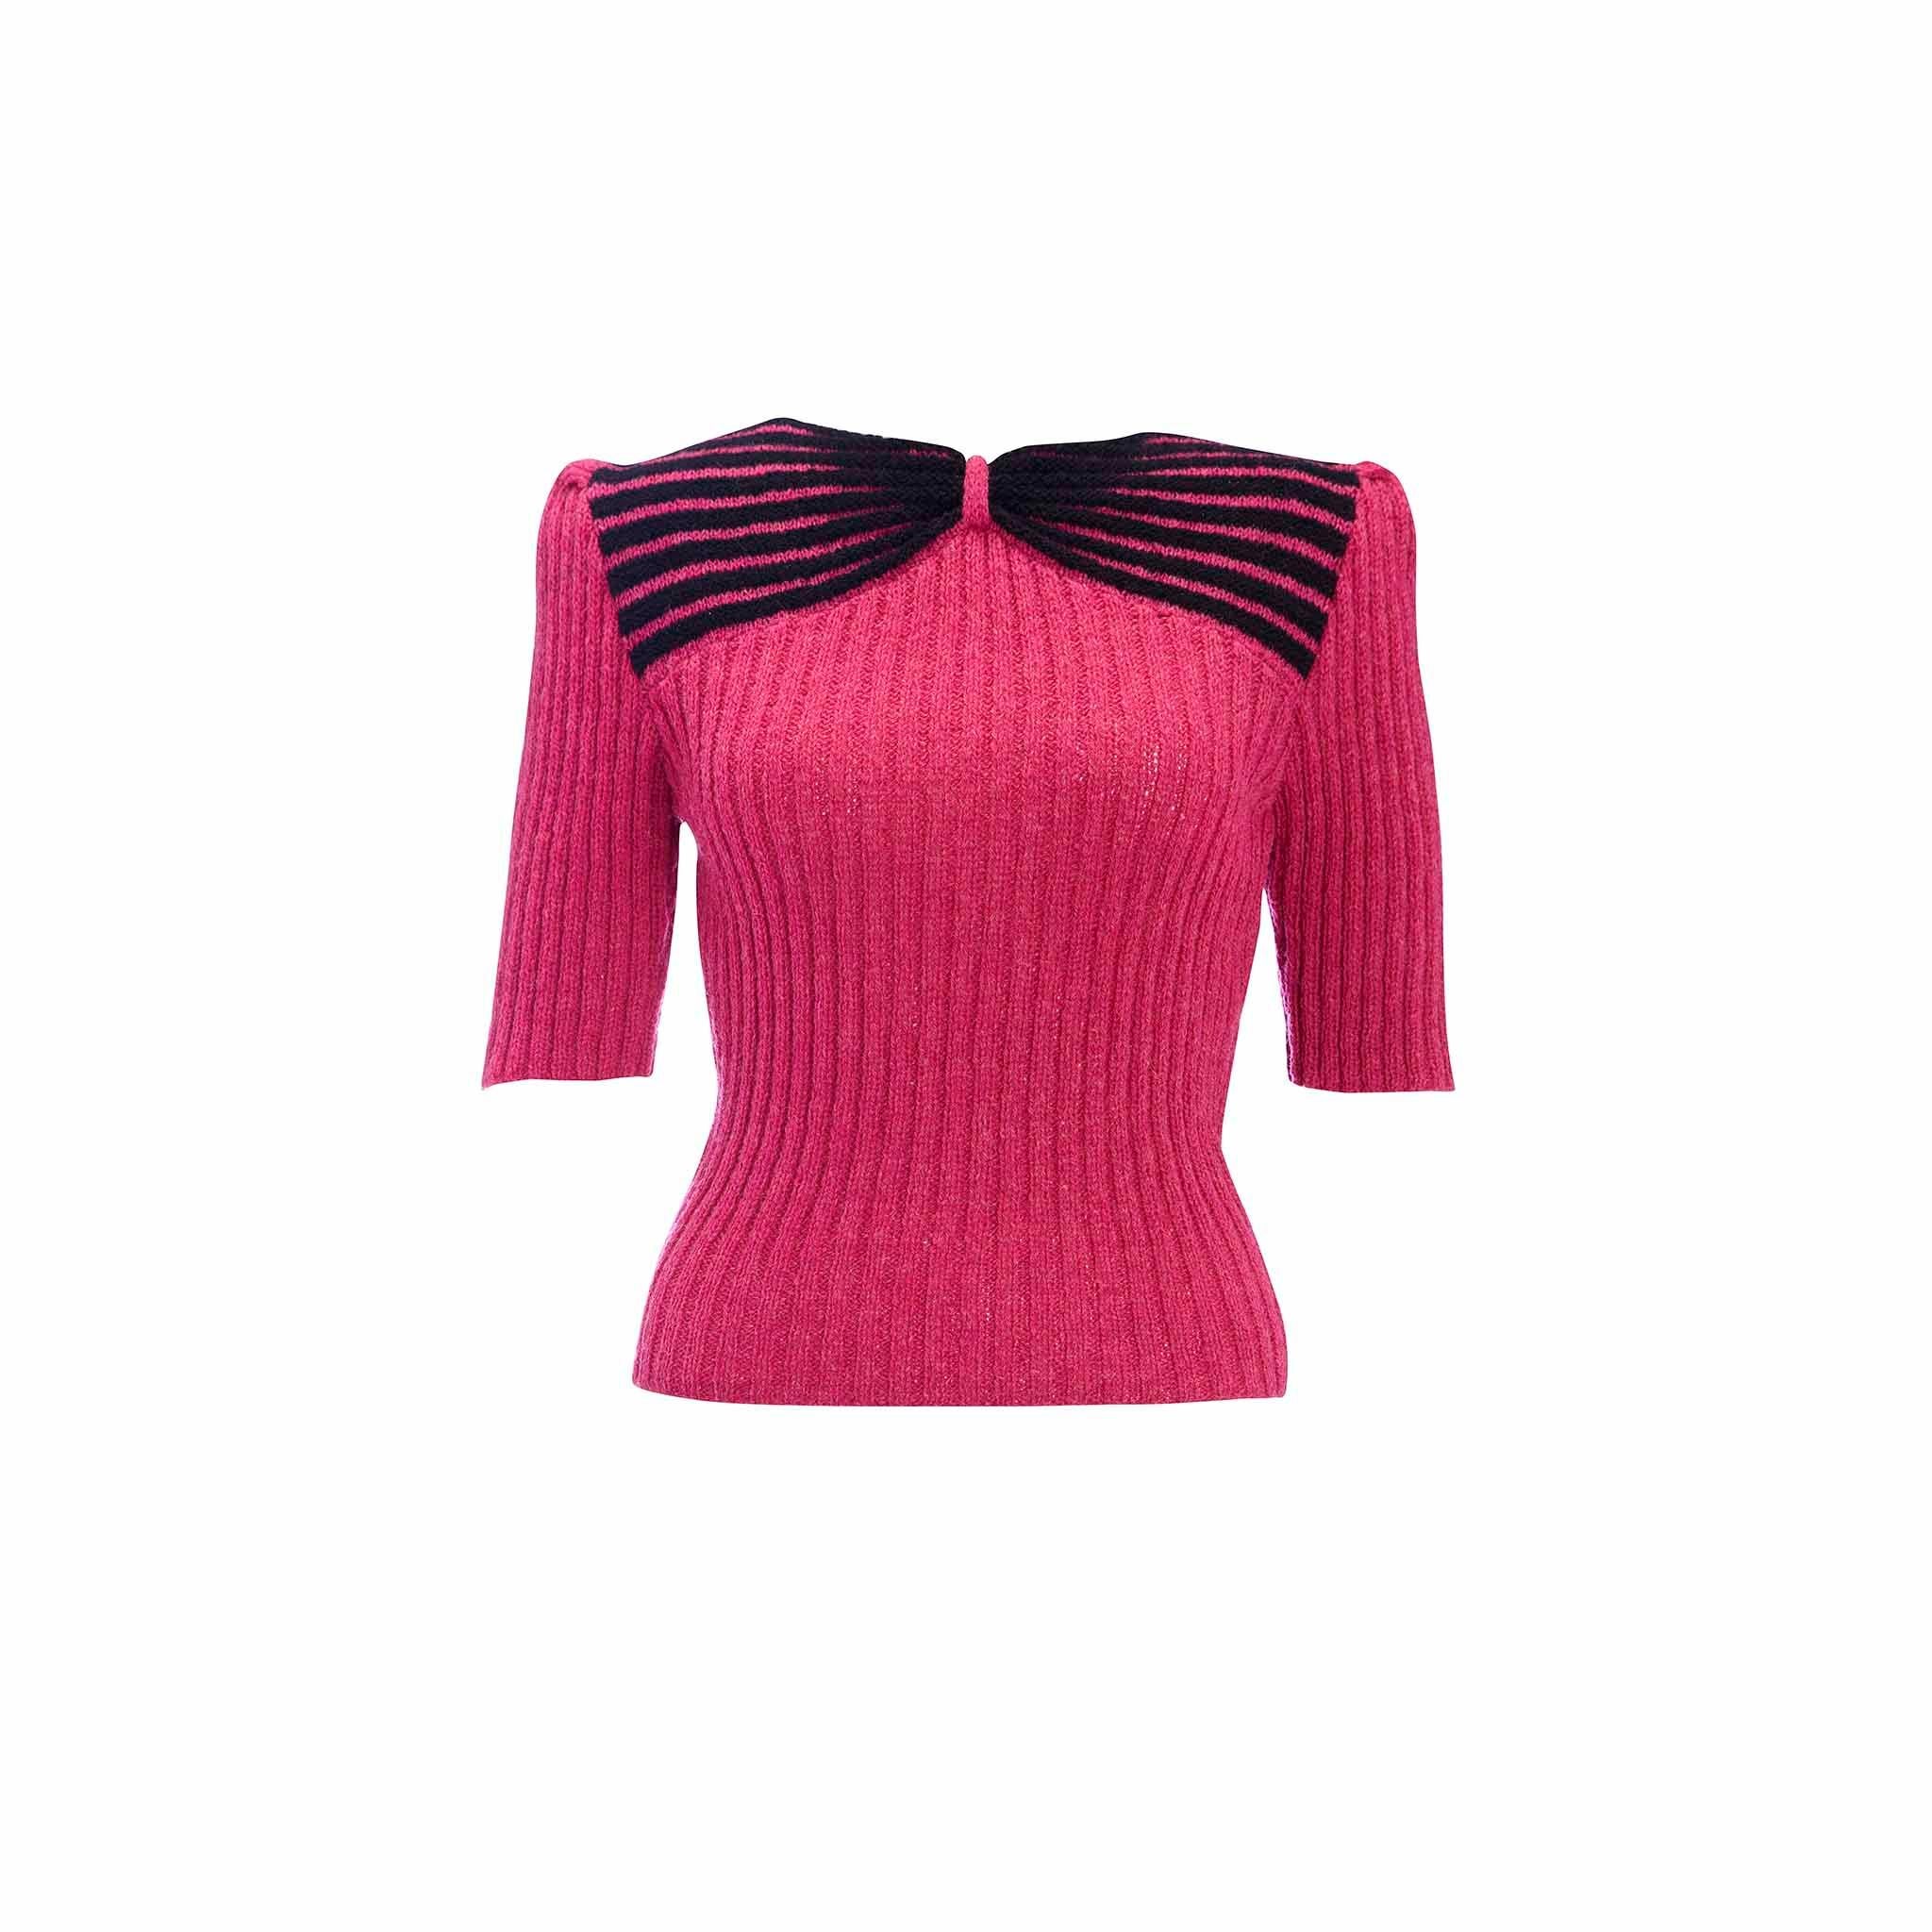 1950s Vintage Jumper - Hand Knitted - Puff Sleeve Detail In Good Condition For Sale In KENT, GB